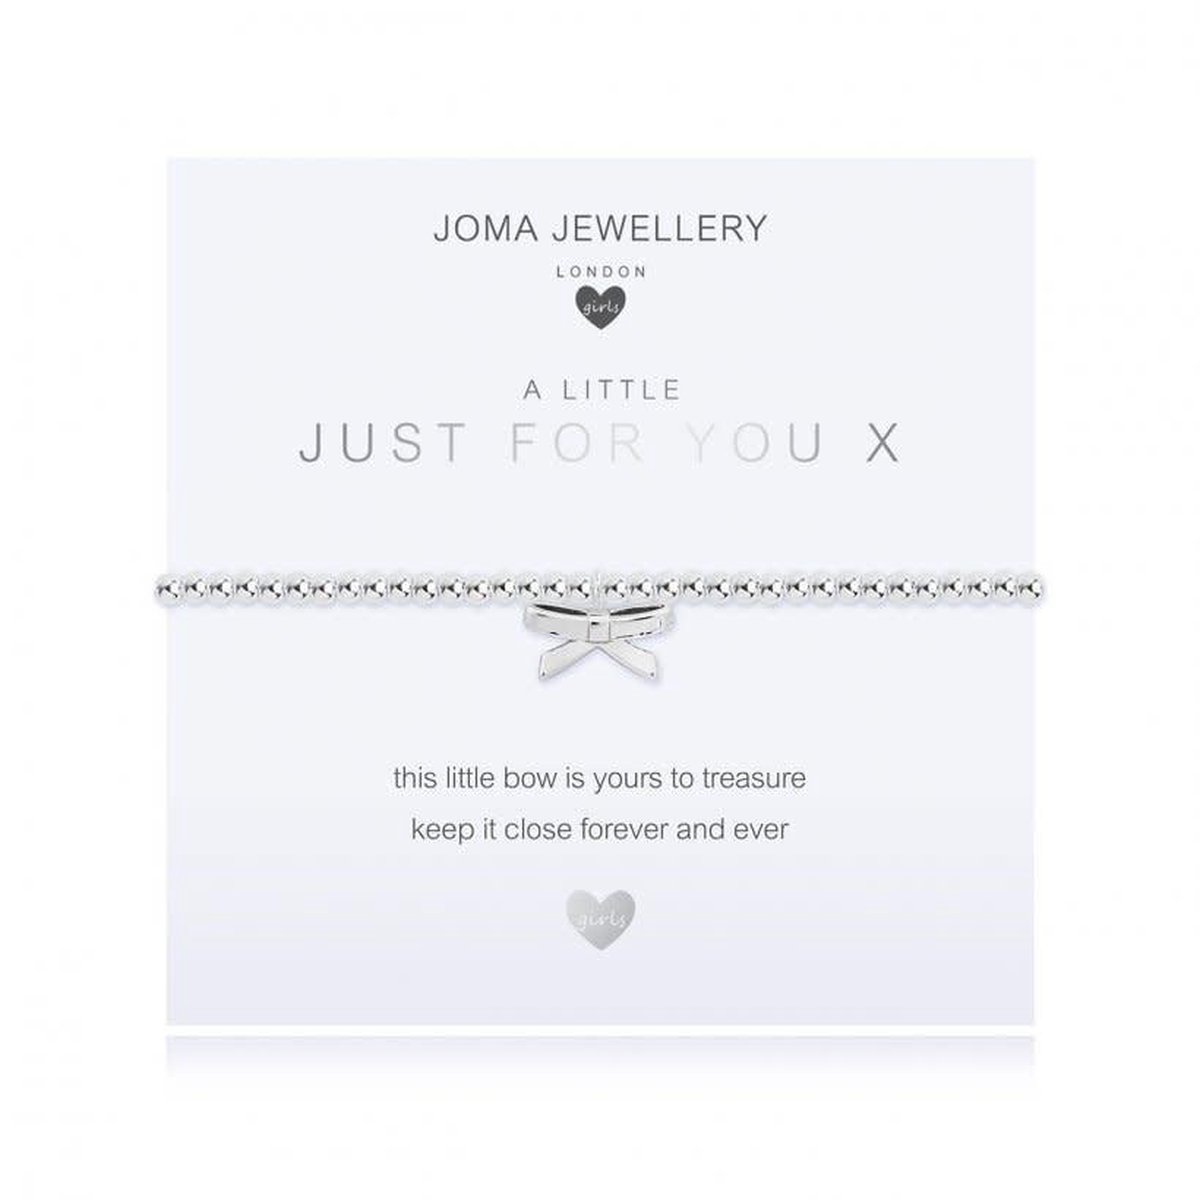 Joma Jewellery Kids - A Little - Just for You